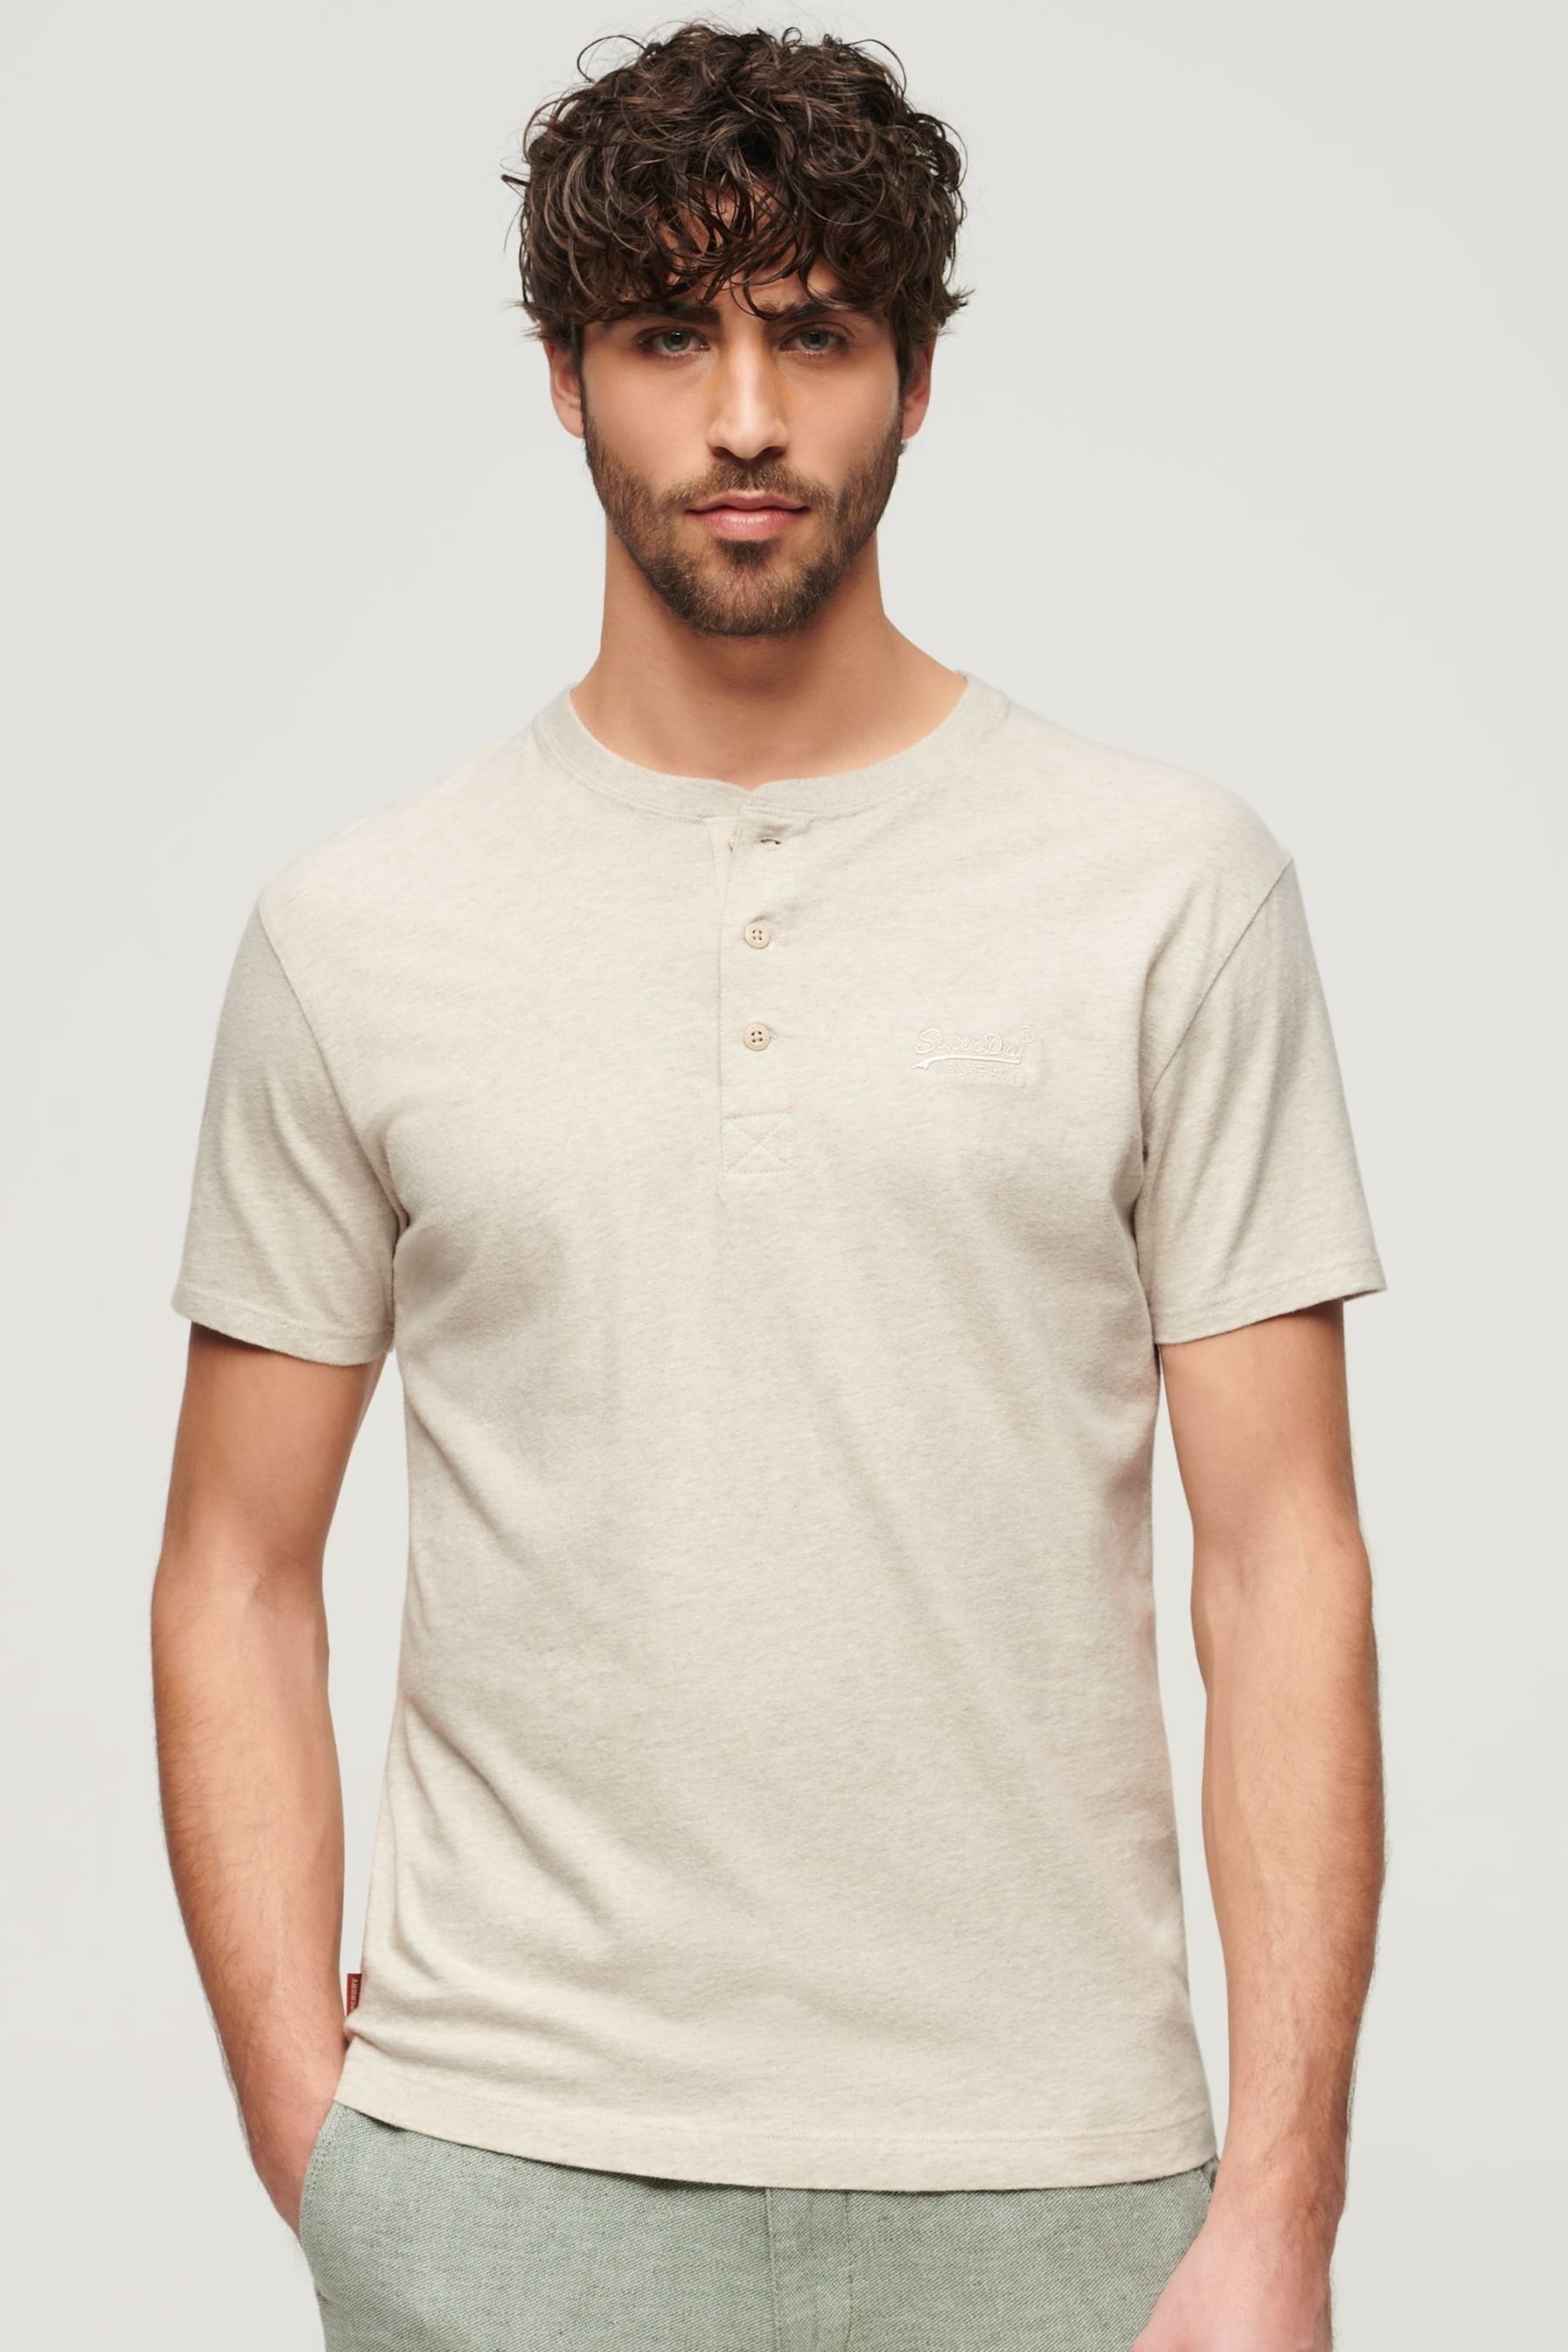 Superdry Cream Organic Cotton Cream Embroidered Henley Top - Image 1 of 7